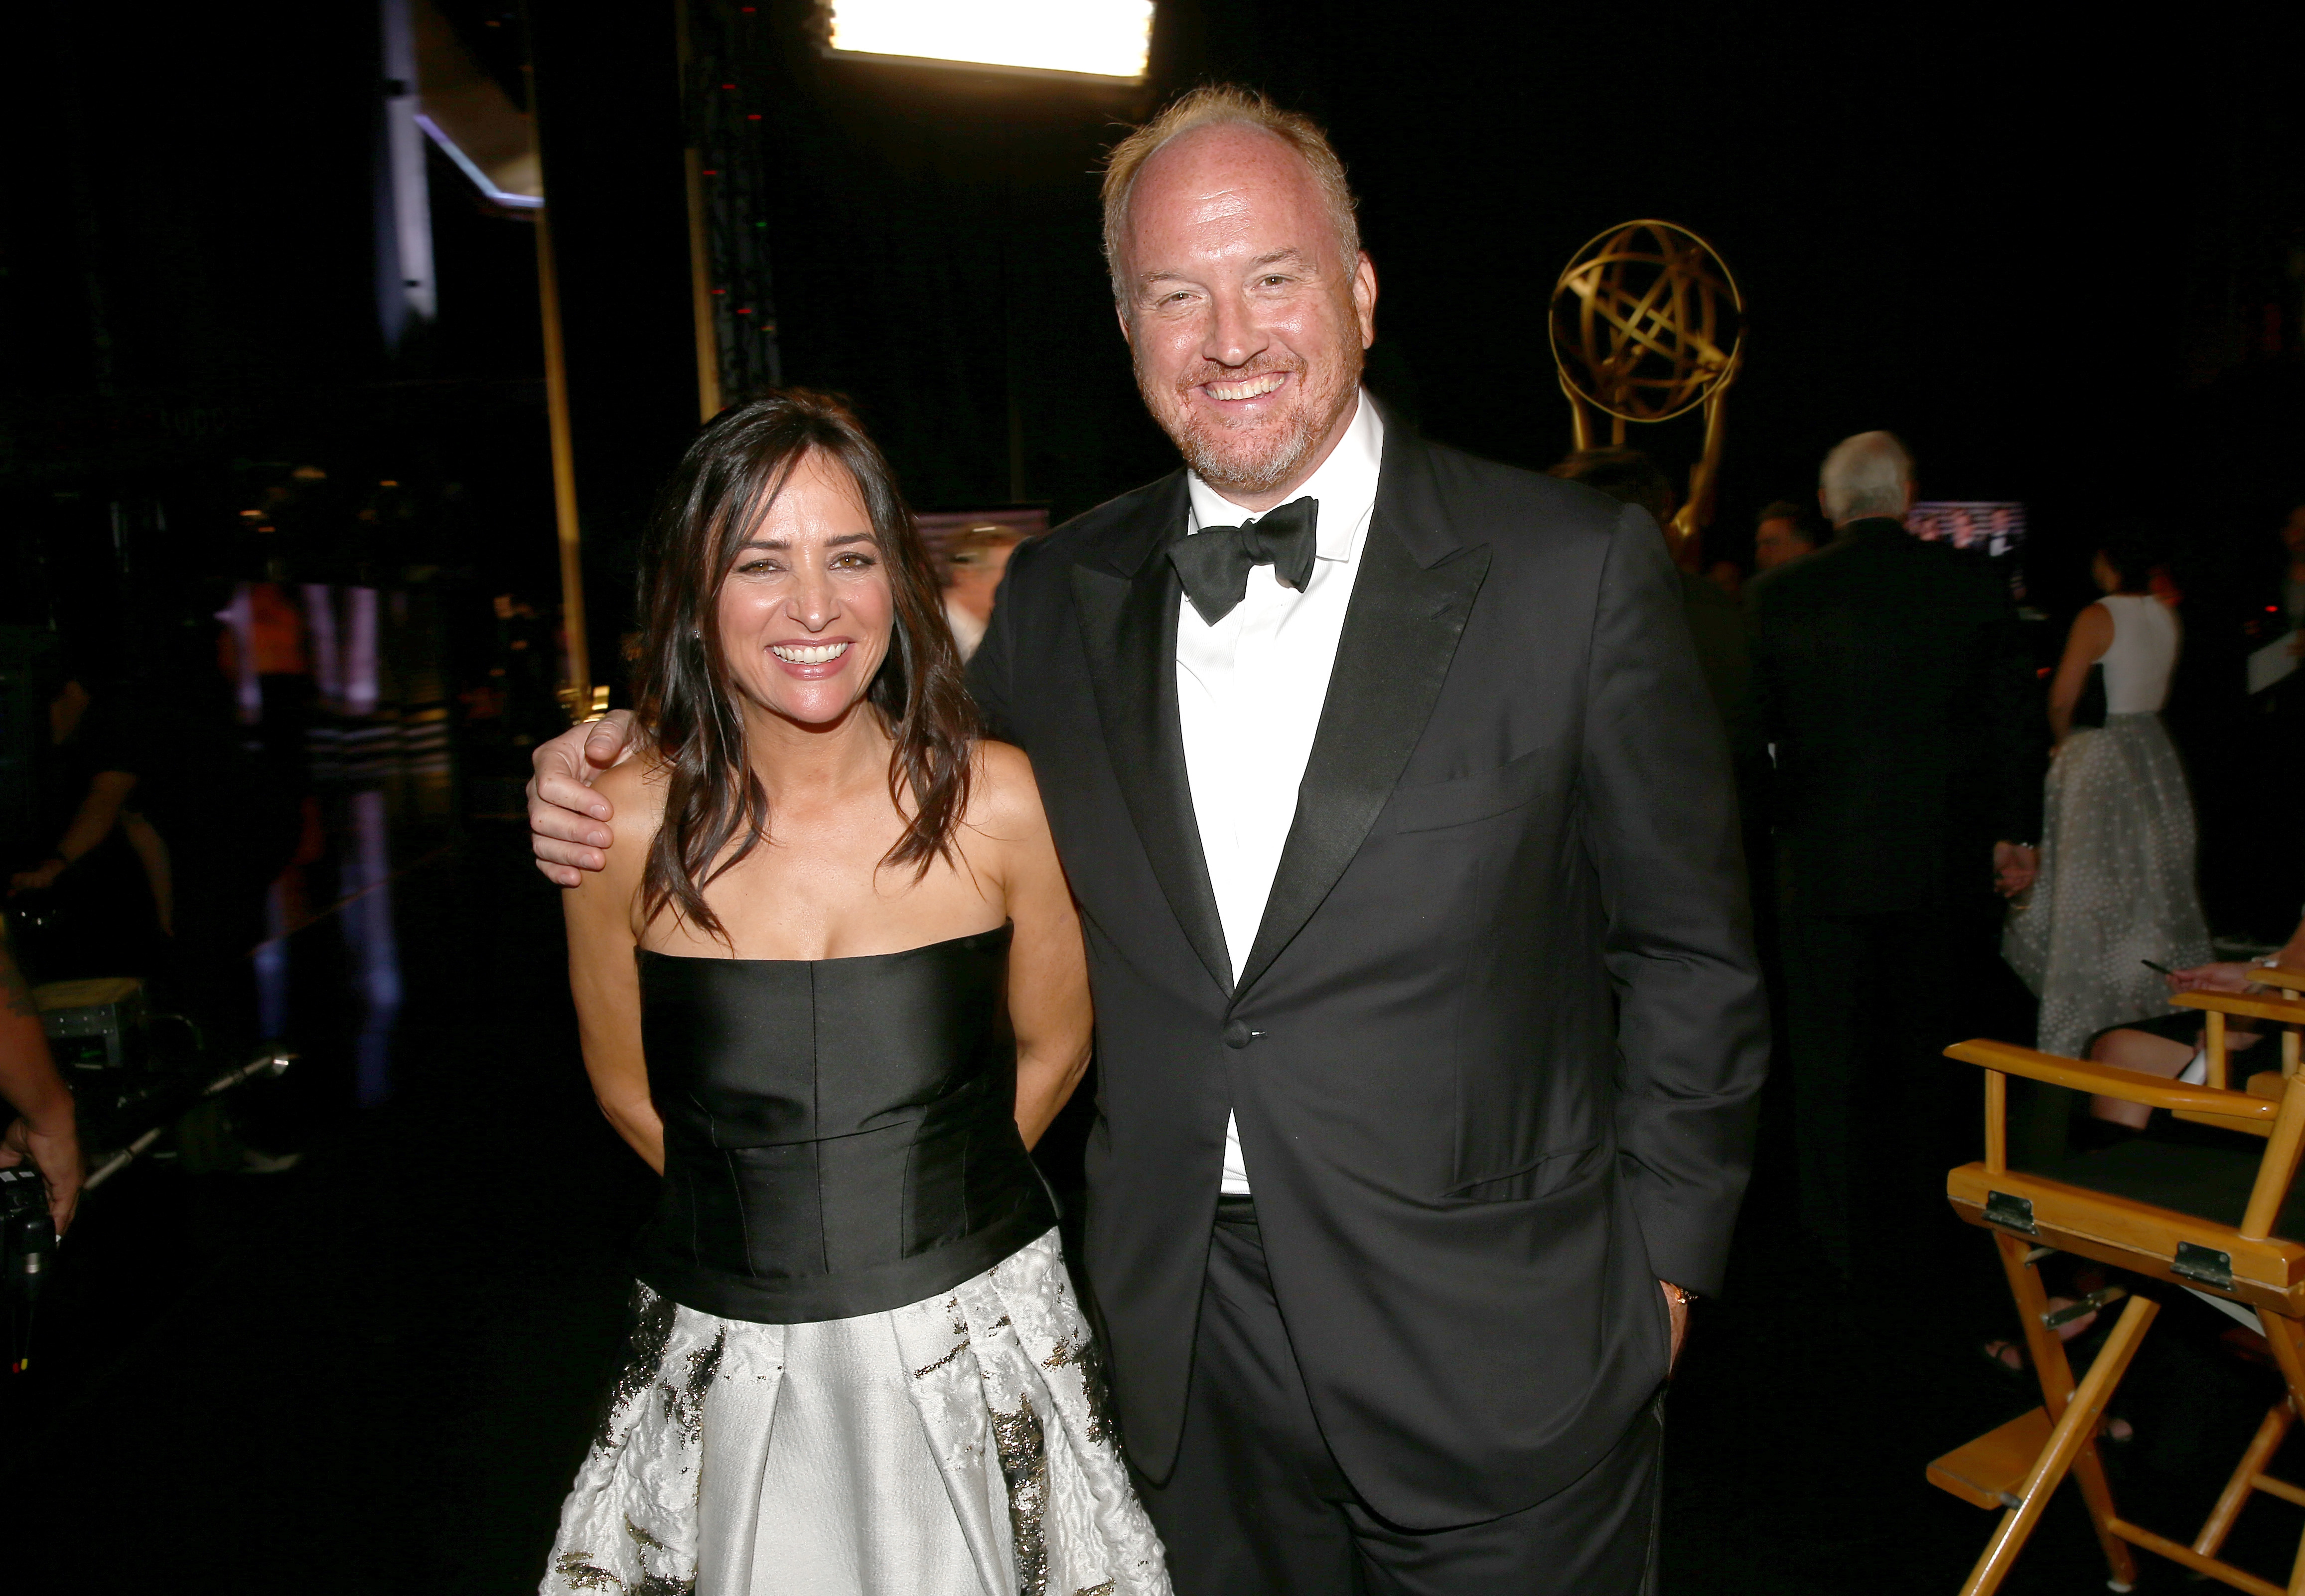 Pamela Adlon and Louis C.K. backstage during the 66th Annual Primetime Emmy Awards held at the Nokia Theater on August 25, 2014. (Christopher Polk/NBC&mdash;NBC via Getty Images)